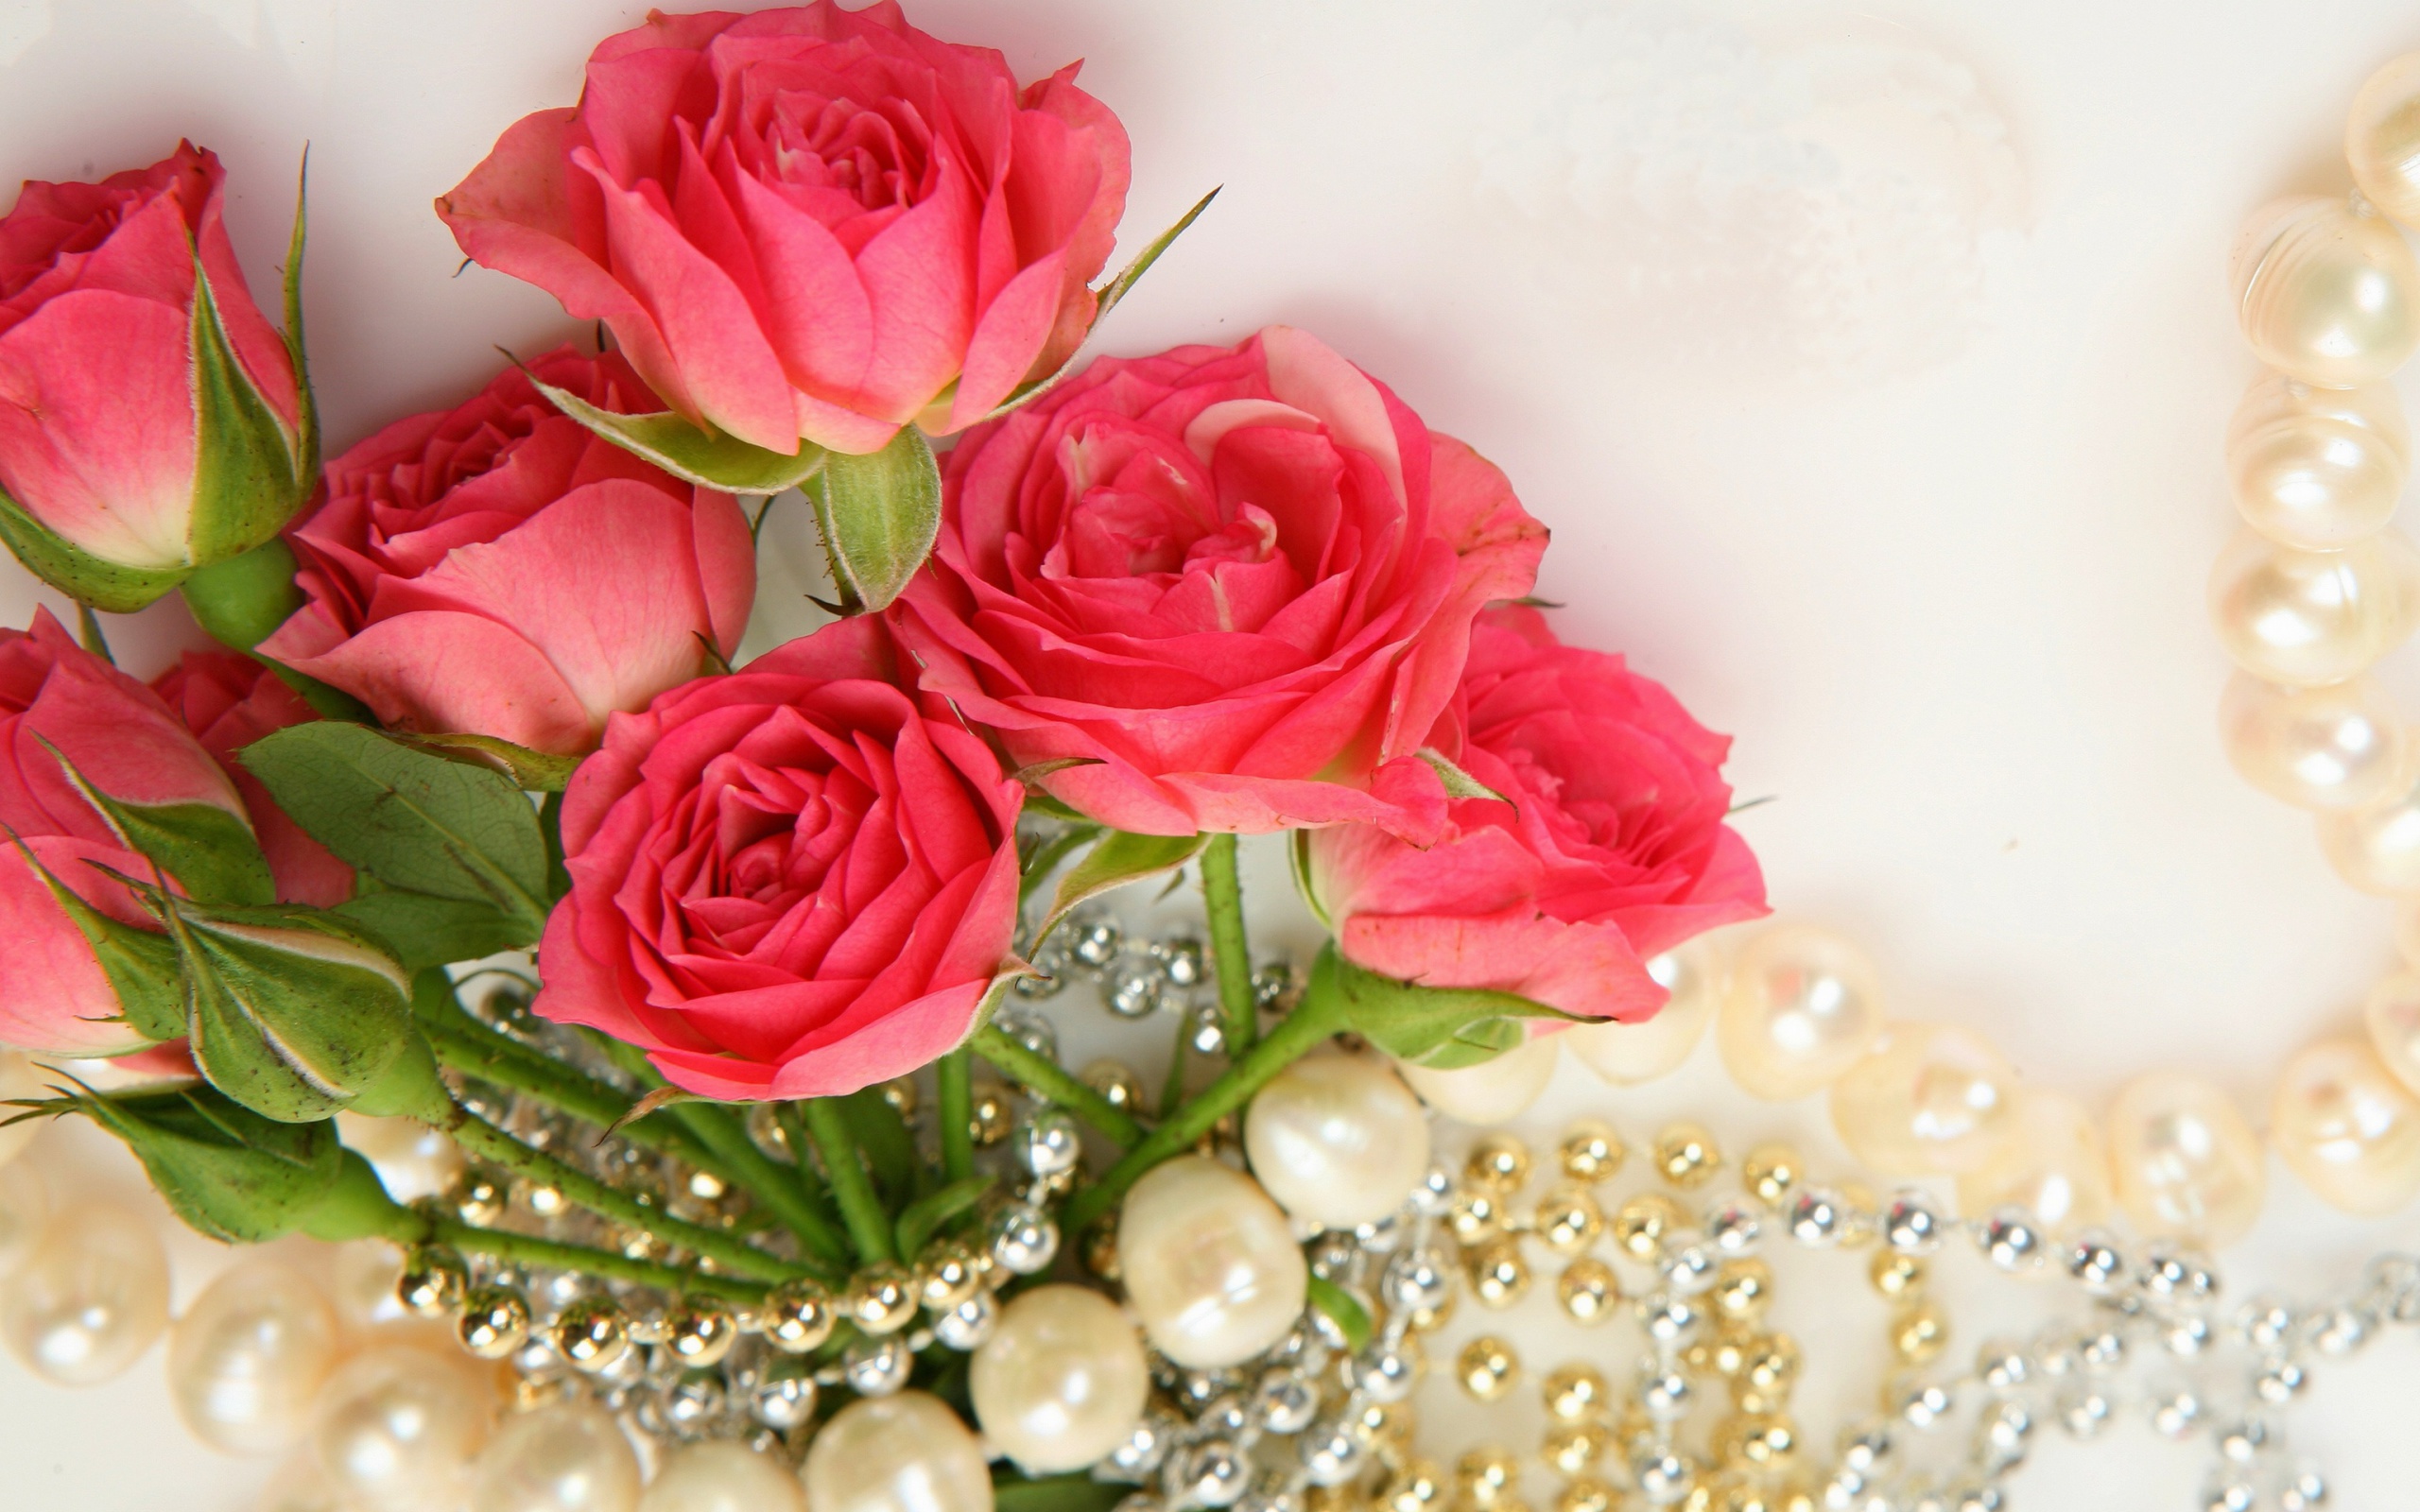 Necklace and Roses Bouquet wallpaper 2560x1600